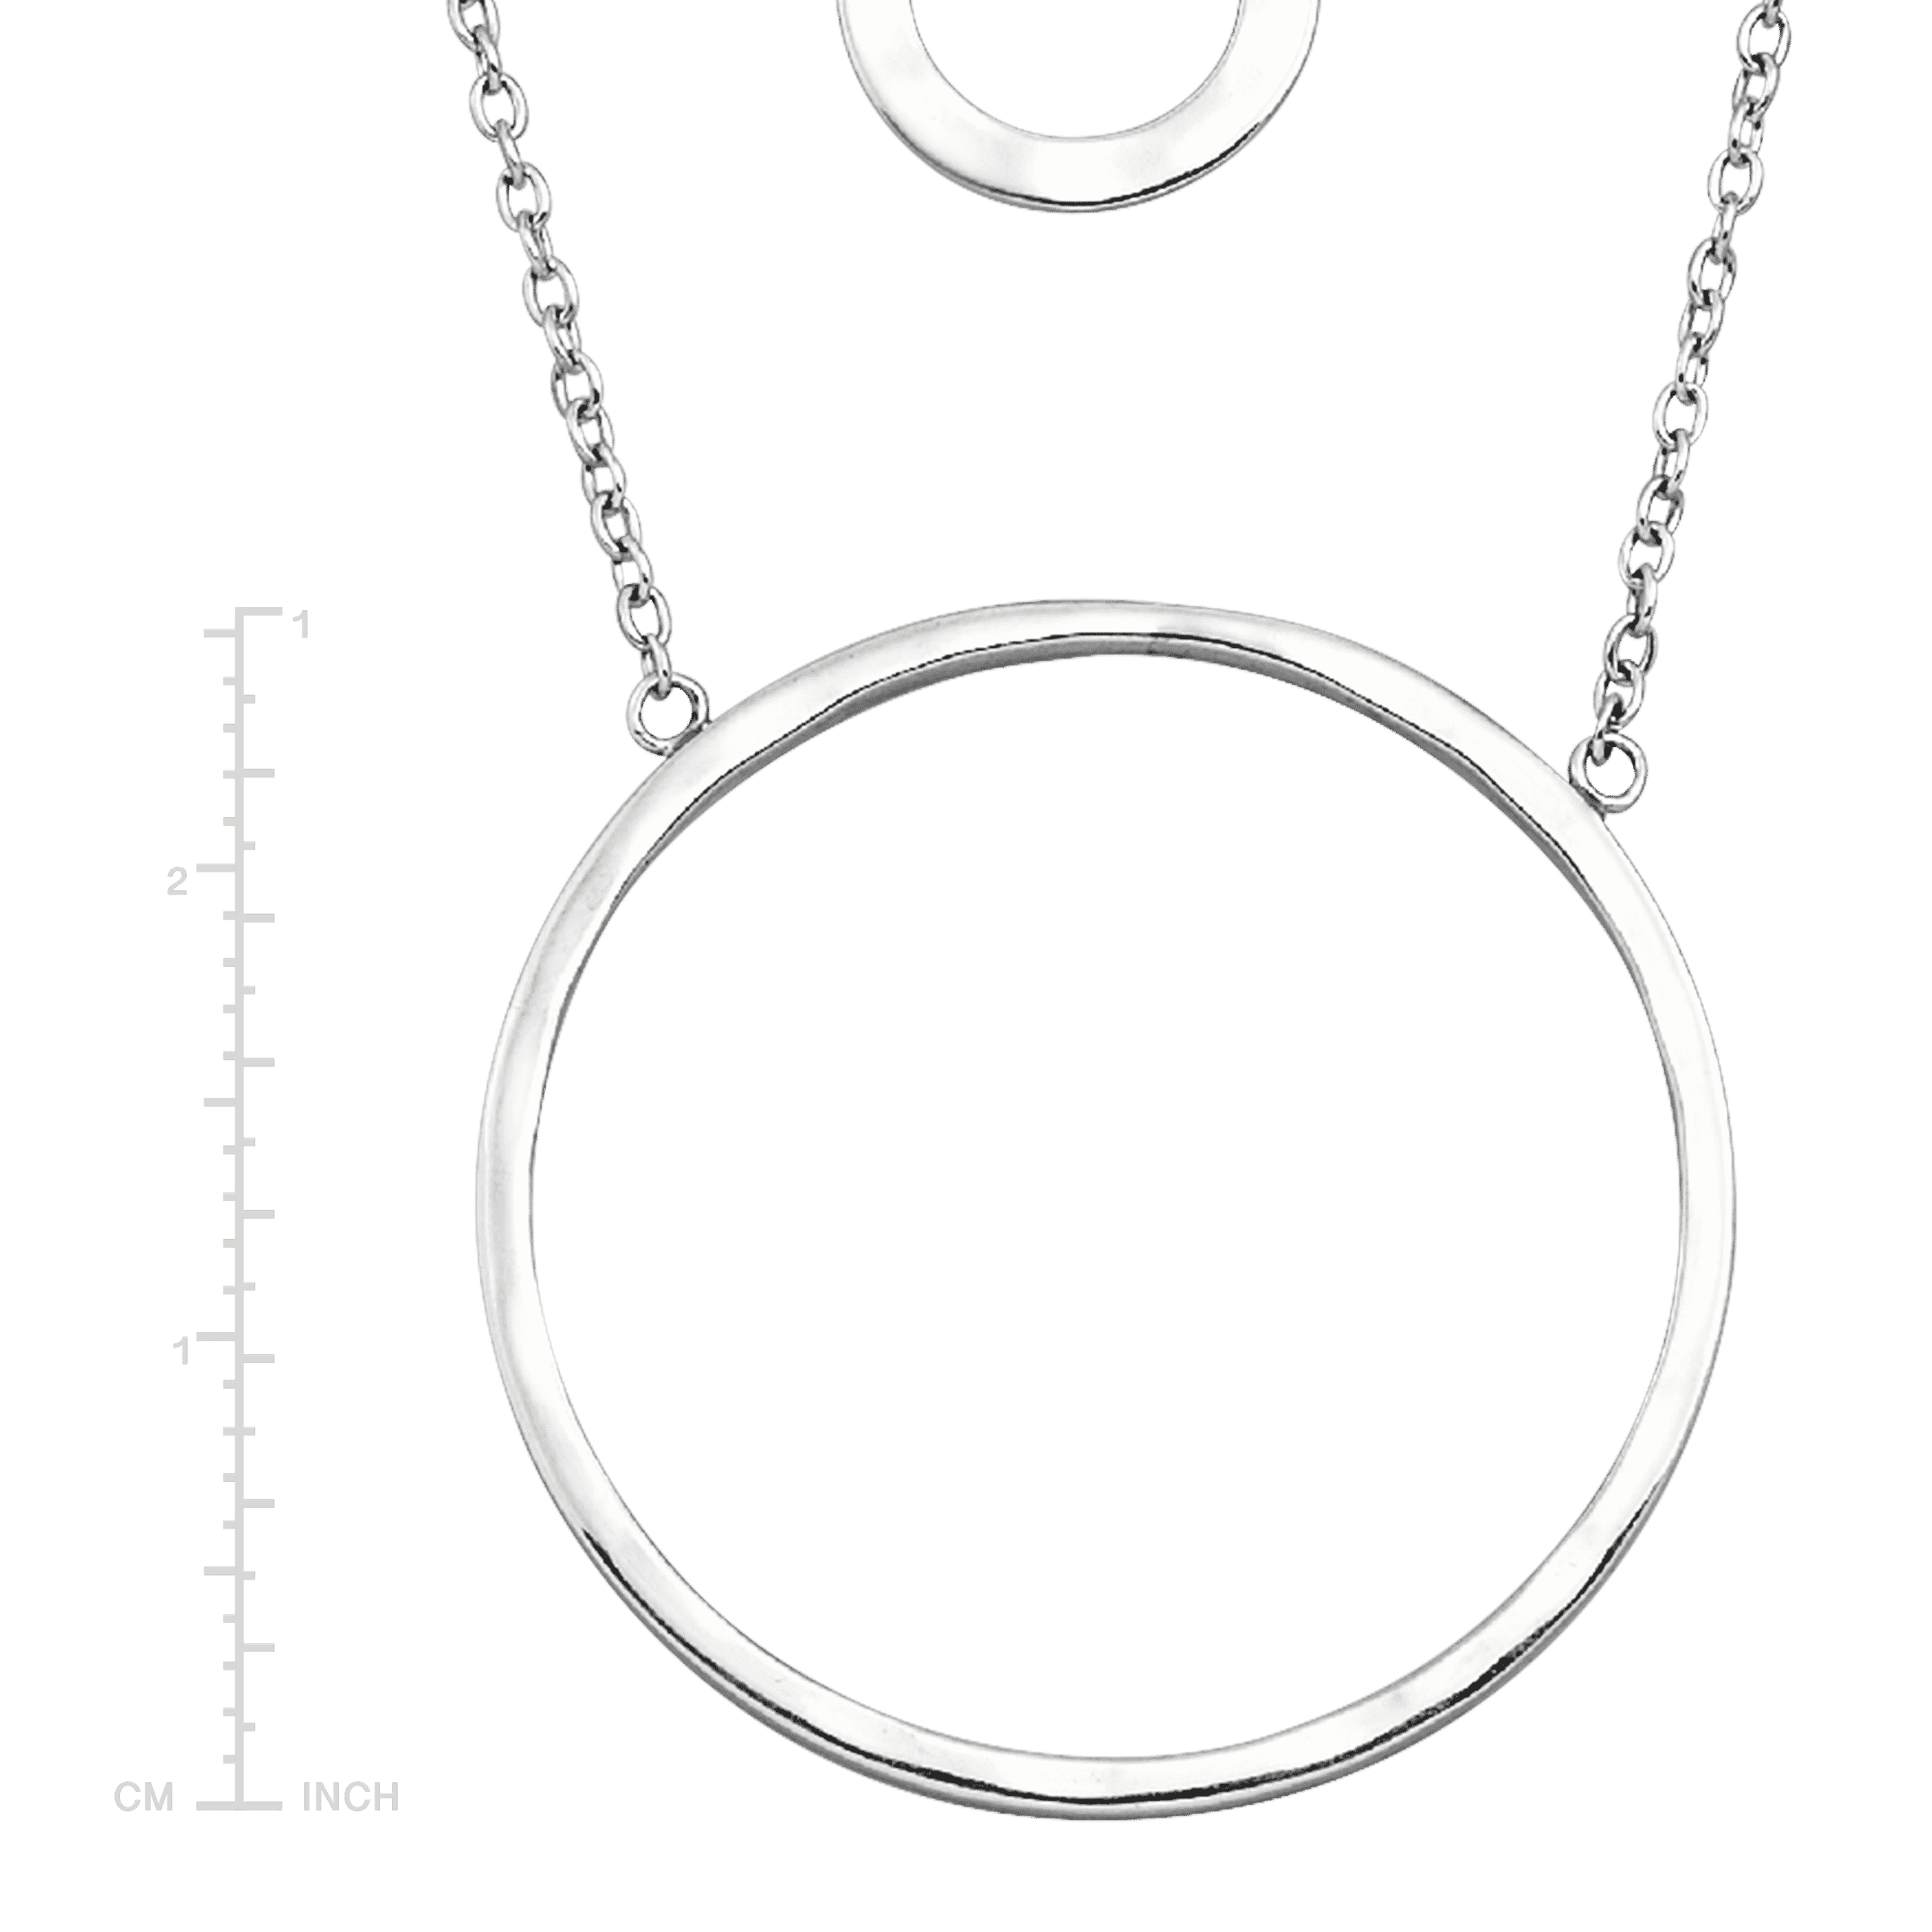 Silpada 'Layered Karma' Necklace in Sterling Silver, 15